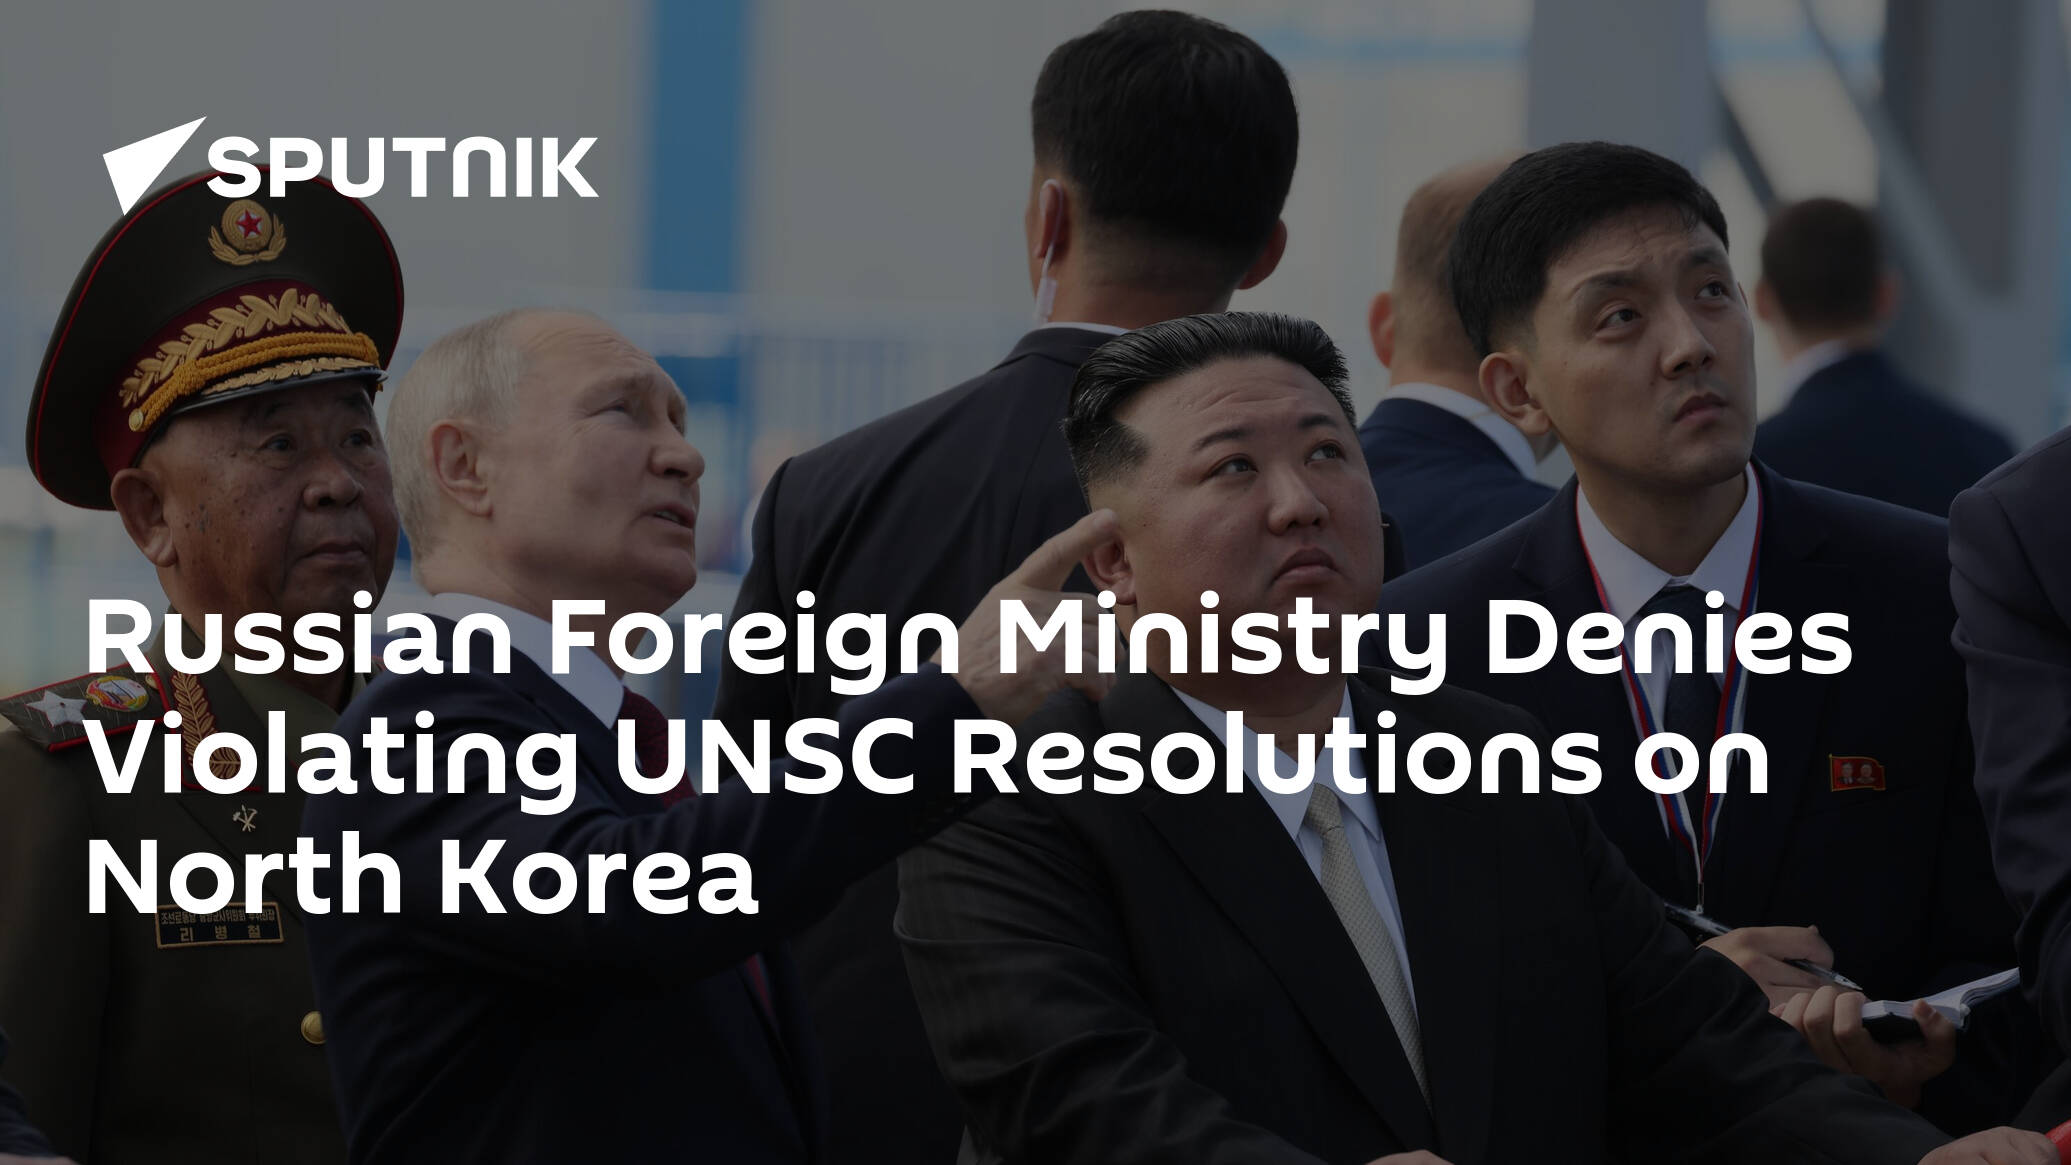 Russian Foreign Ministry Denies Violating UNSC Resolutions on North Korea